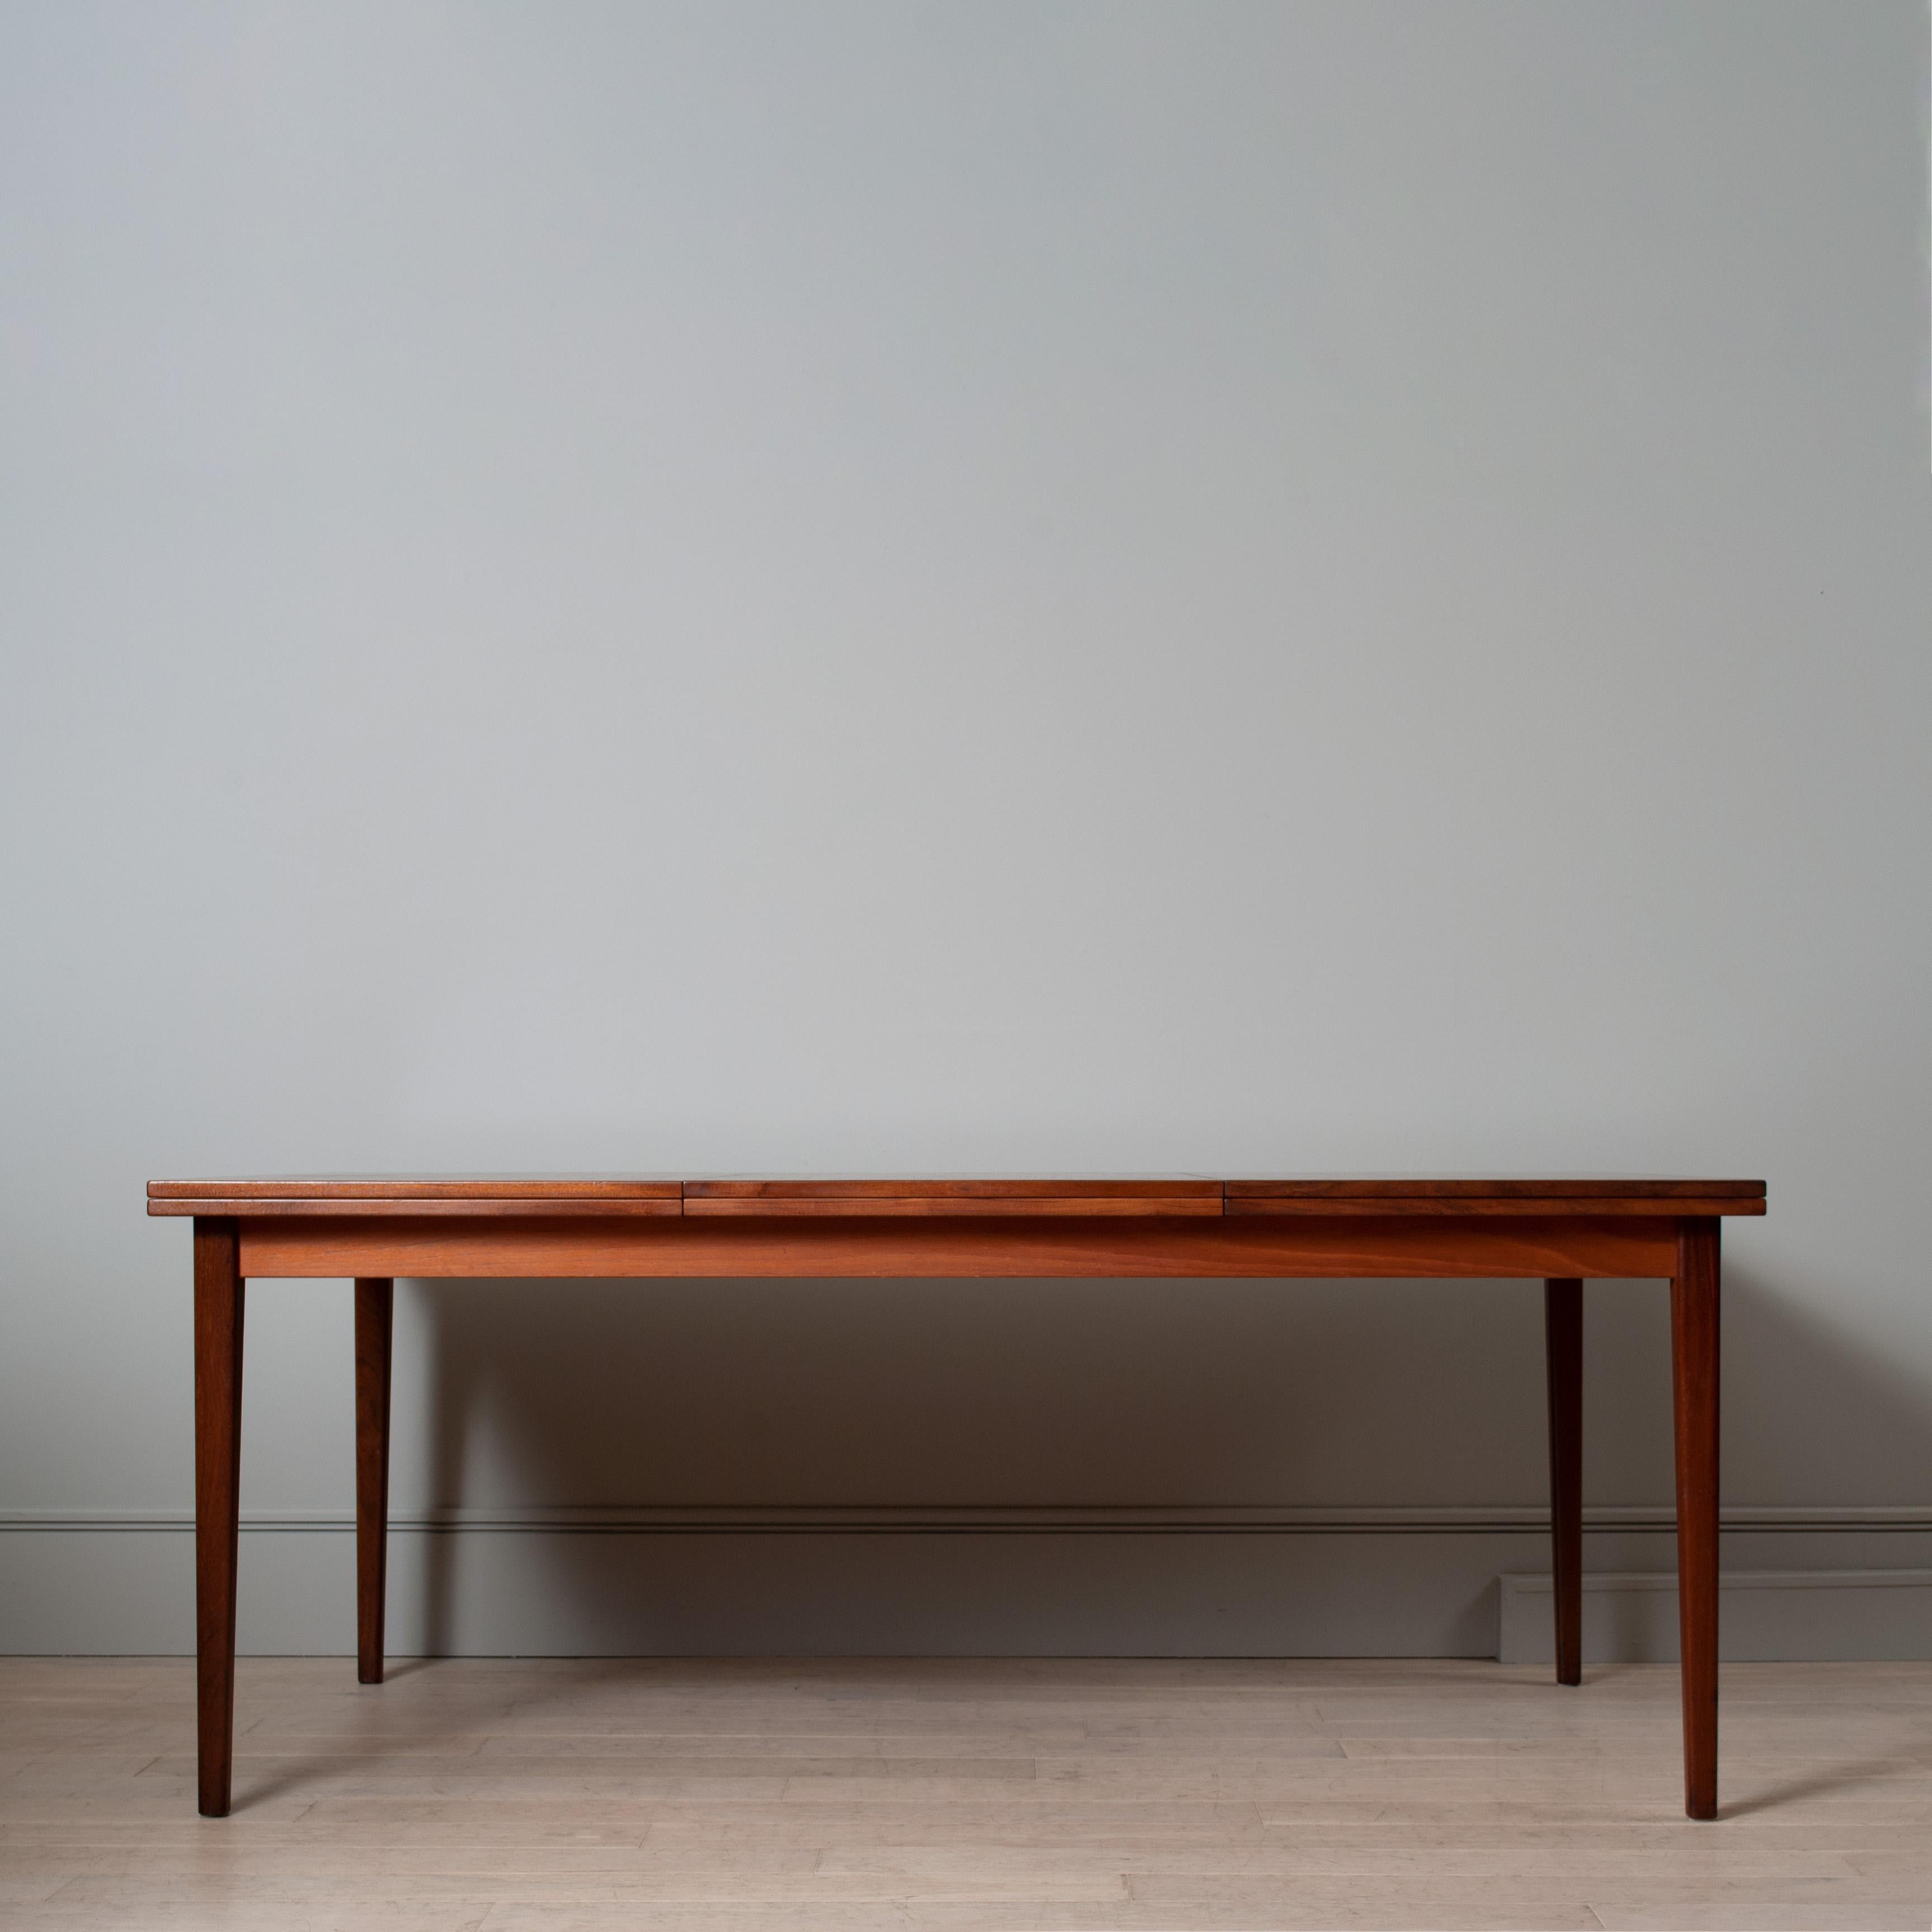 A huge Swedish streamlined teak double extending table - with a significant length of 3m when fully extended. 
This is a versatile, solid and robust modernist design table with a smooth and genius sliding operation. The solid brass hinged flip open